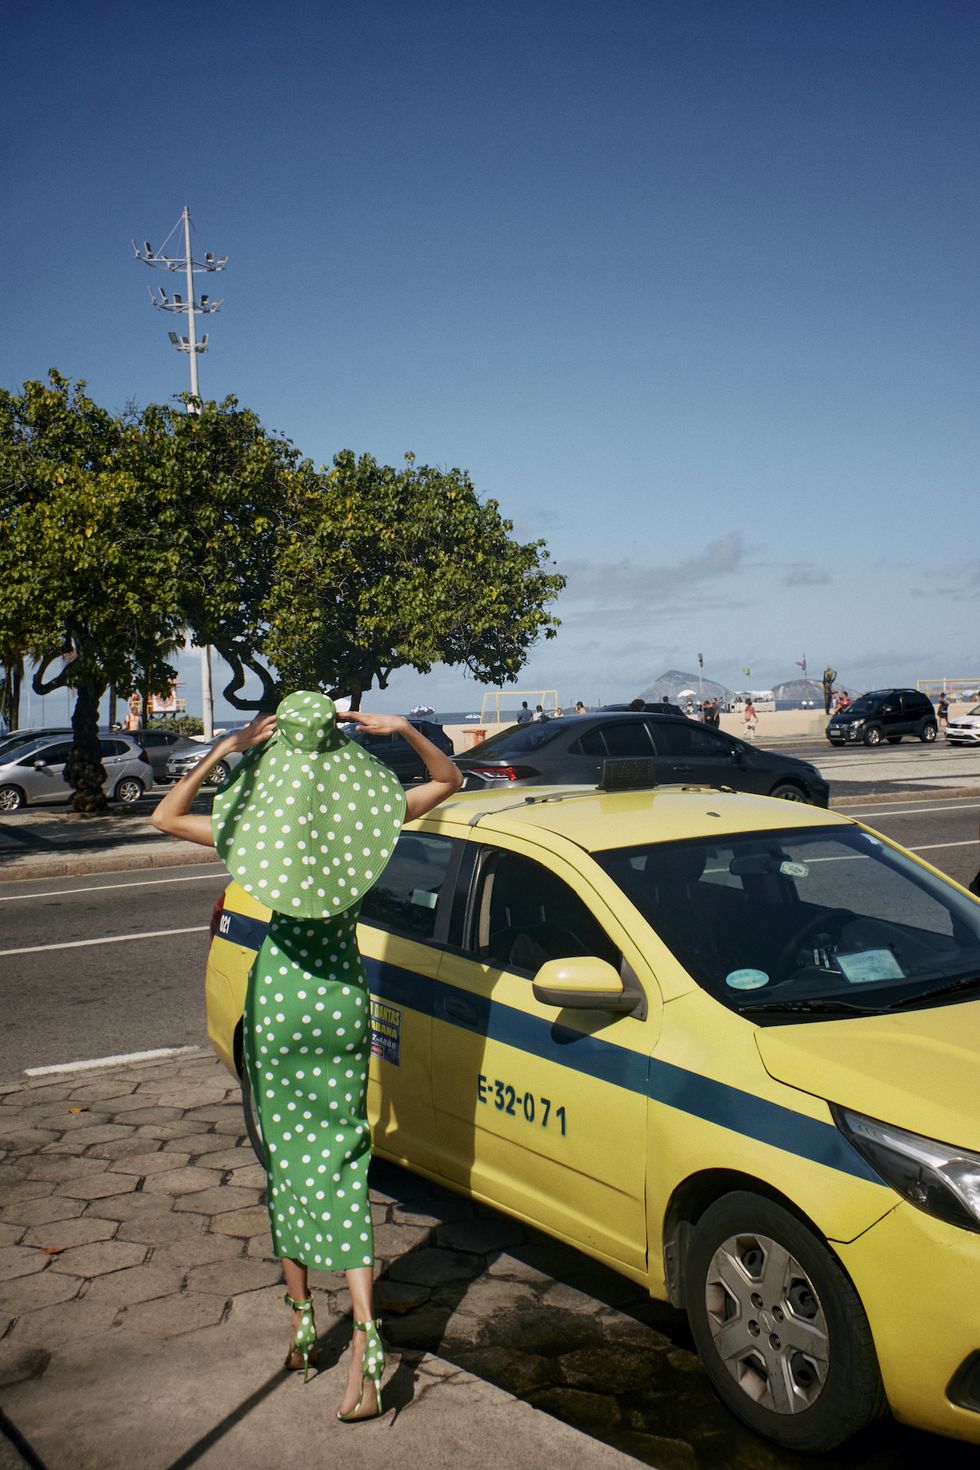 a person in a garment standing next to a yellow car